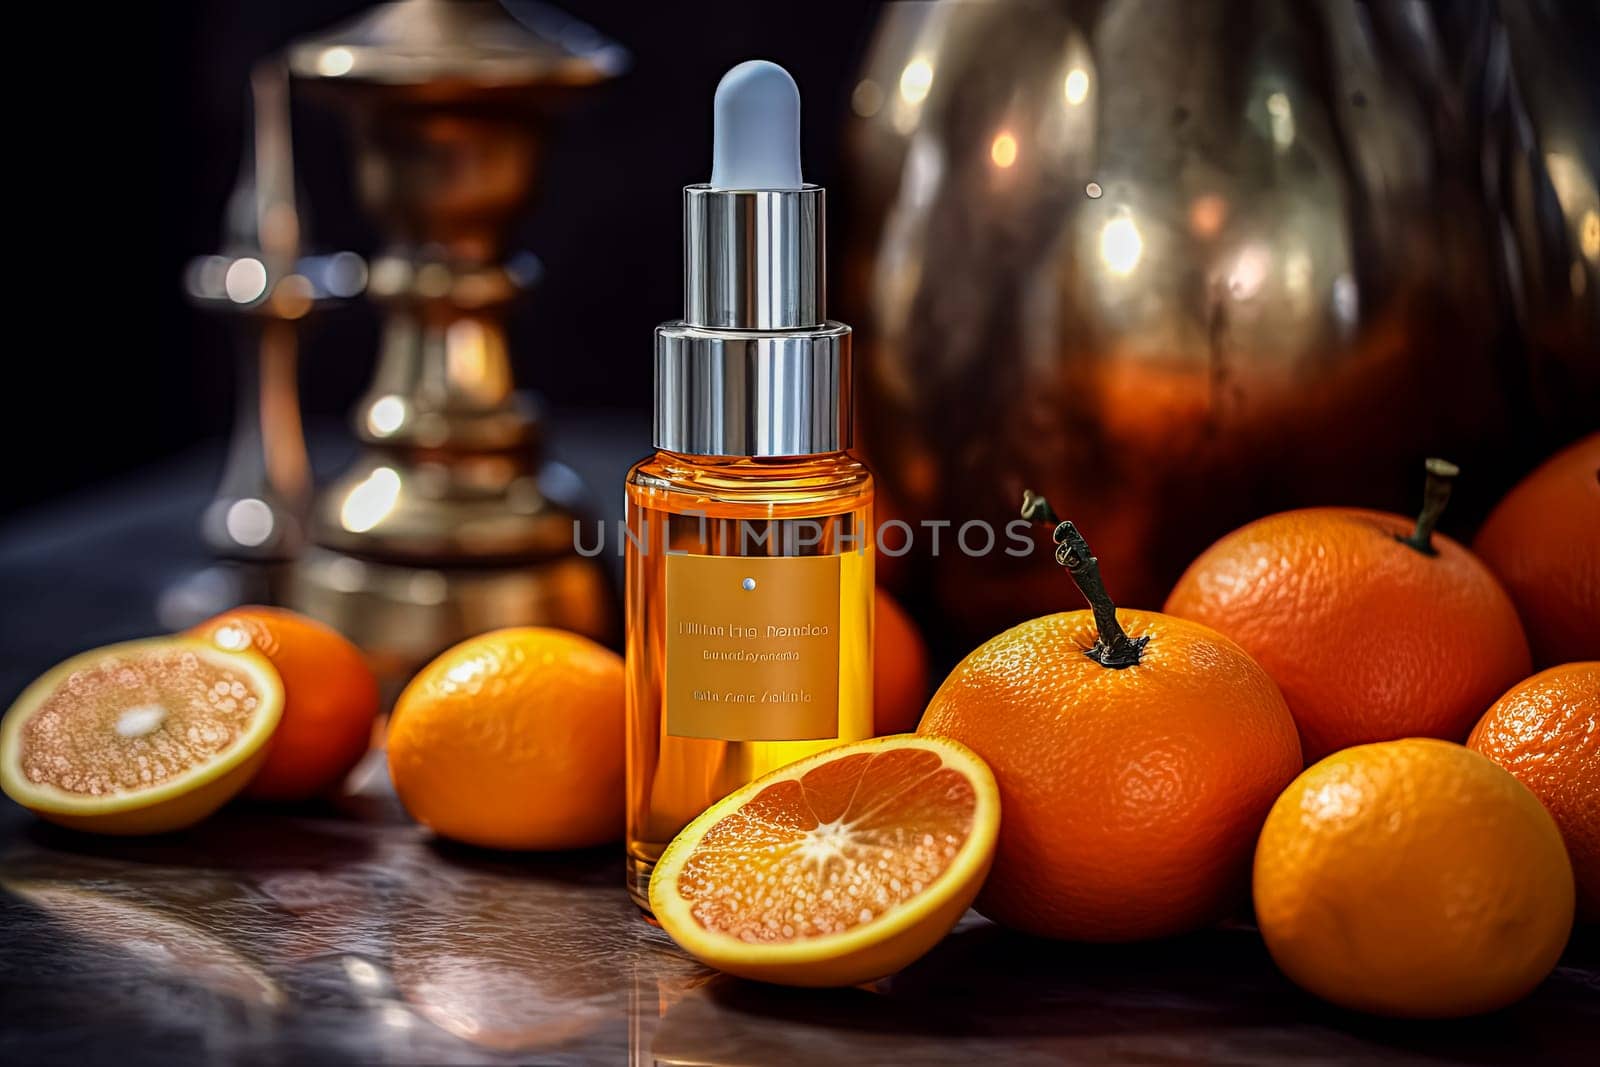 A bottle of orange face oil sits on the table surrounded by oranges, representing natural skincare.